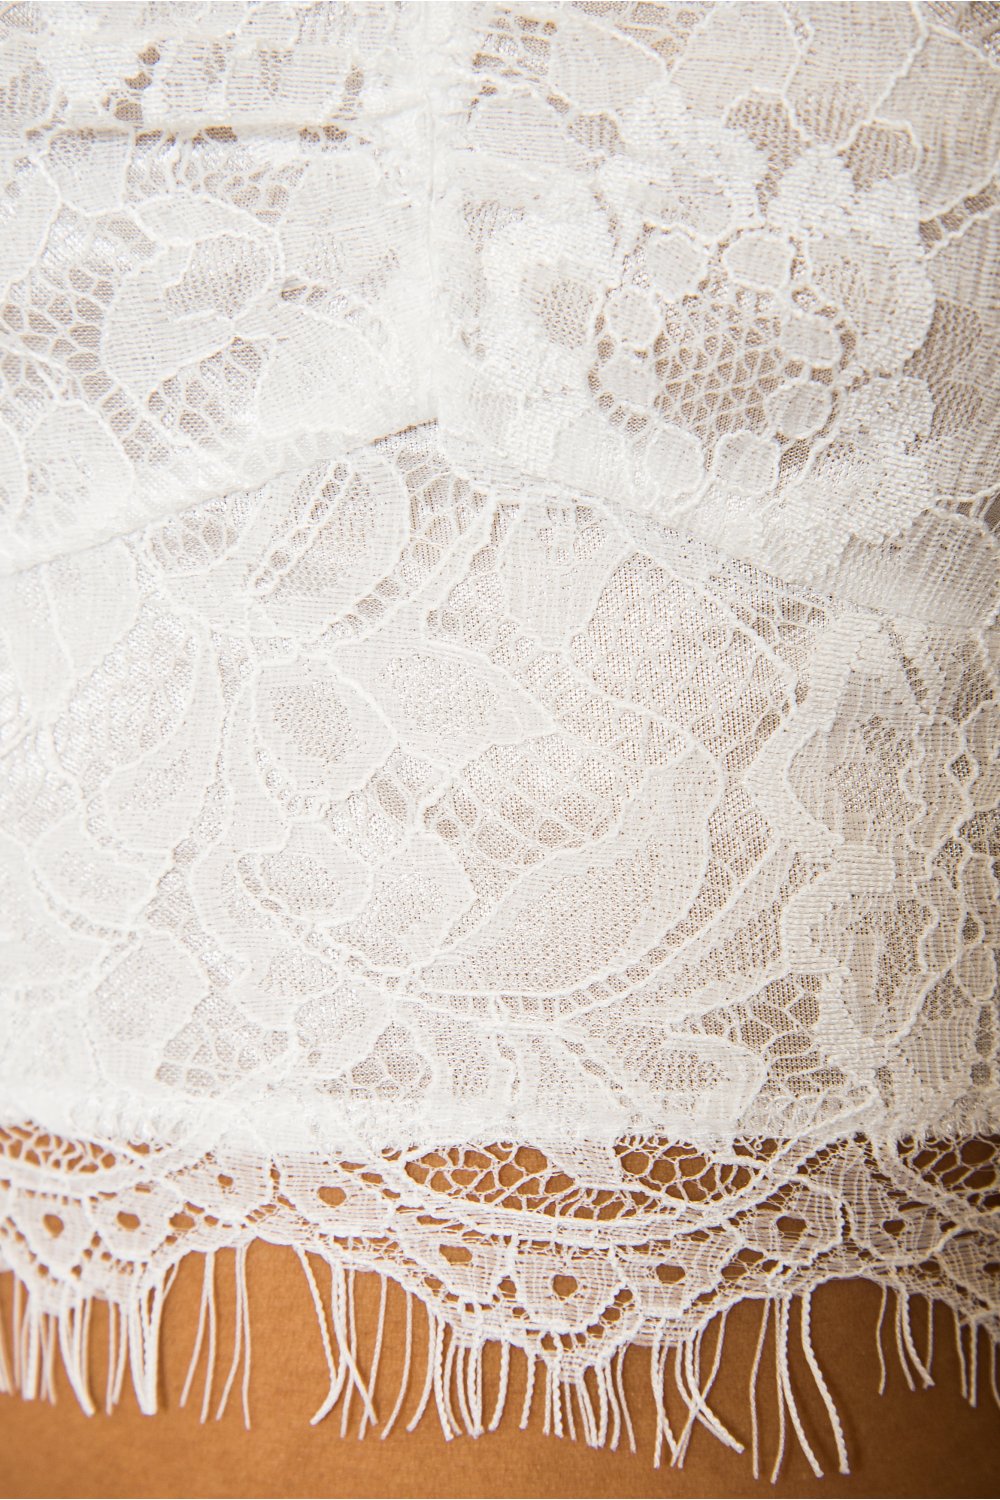 Date Night White Lace Bralet Top